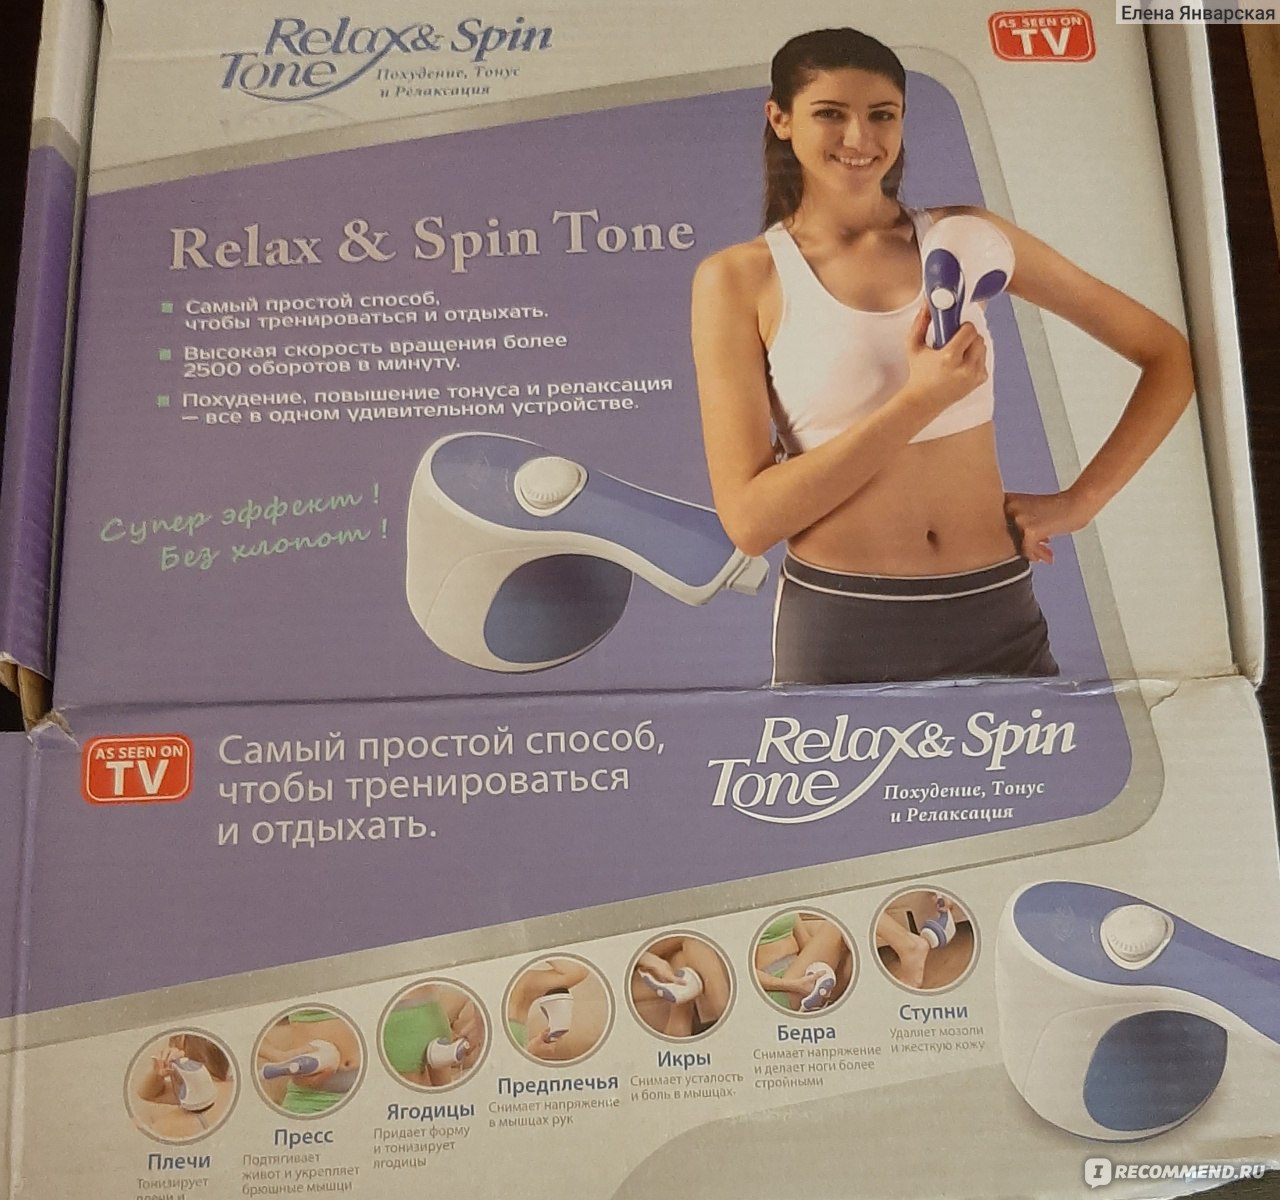 Relax spin tone. Релакс-массажер "Relax & Spin релакс-массажер "Relax & Spin Tone"Tone". Relax Spin Tone массажер. Релакс тайм массажер для спины 3 в1. GD-064 массажер Relax & Spin Tone.